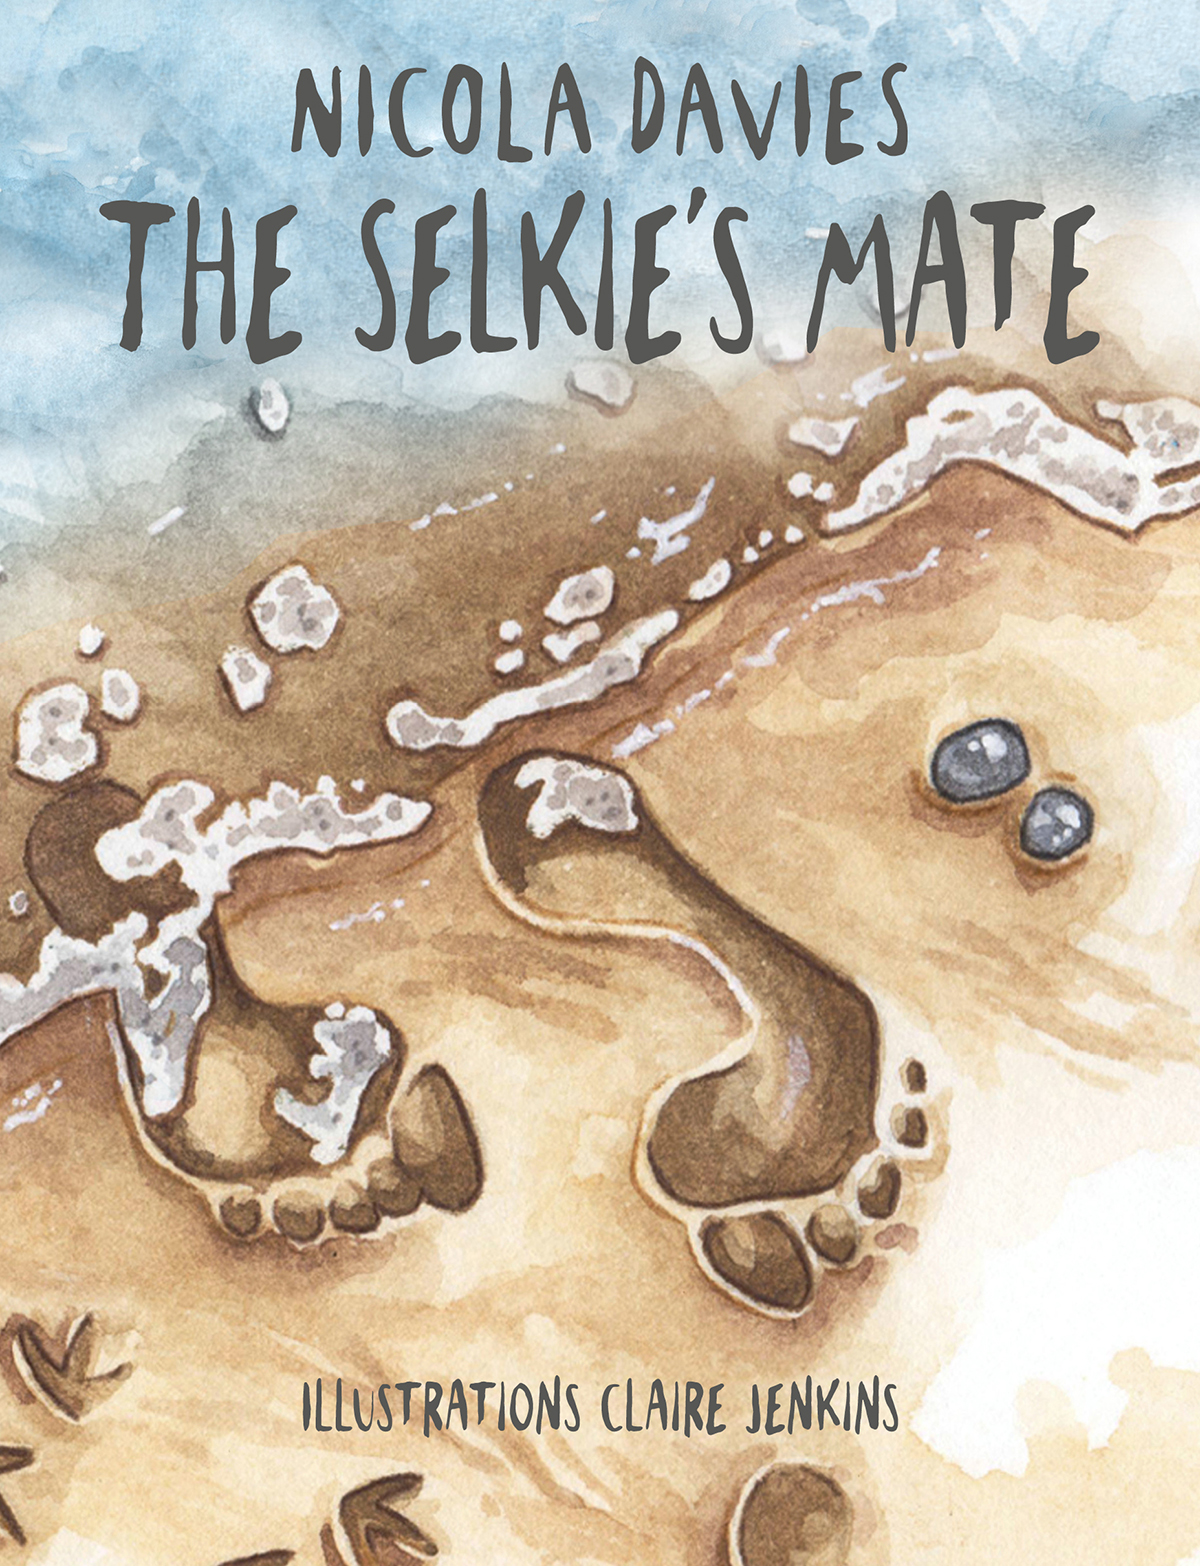 The Selkie's Mate by Nicola Davies